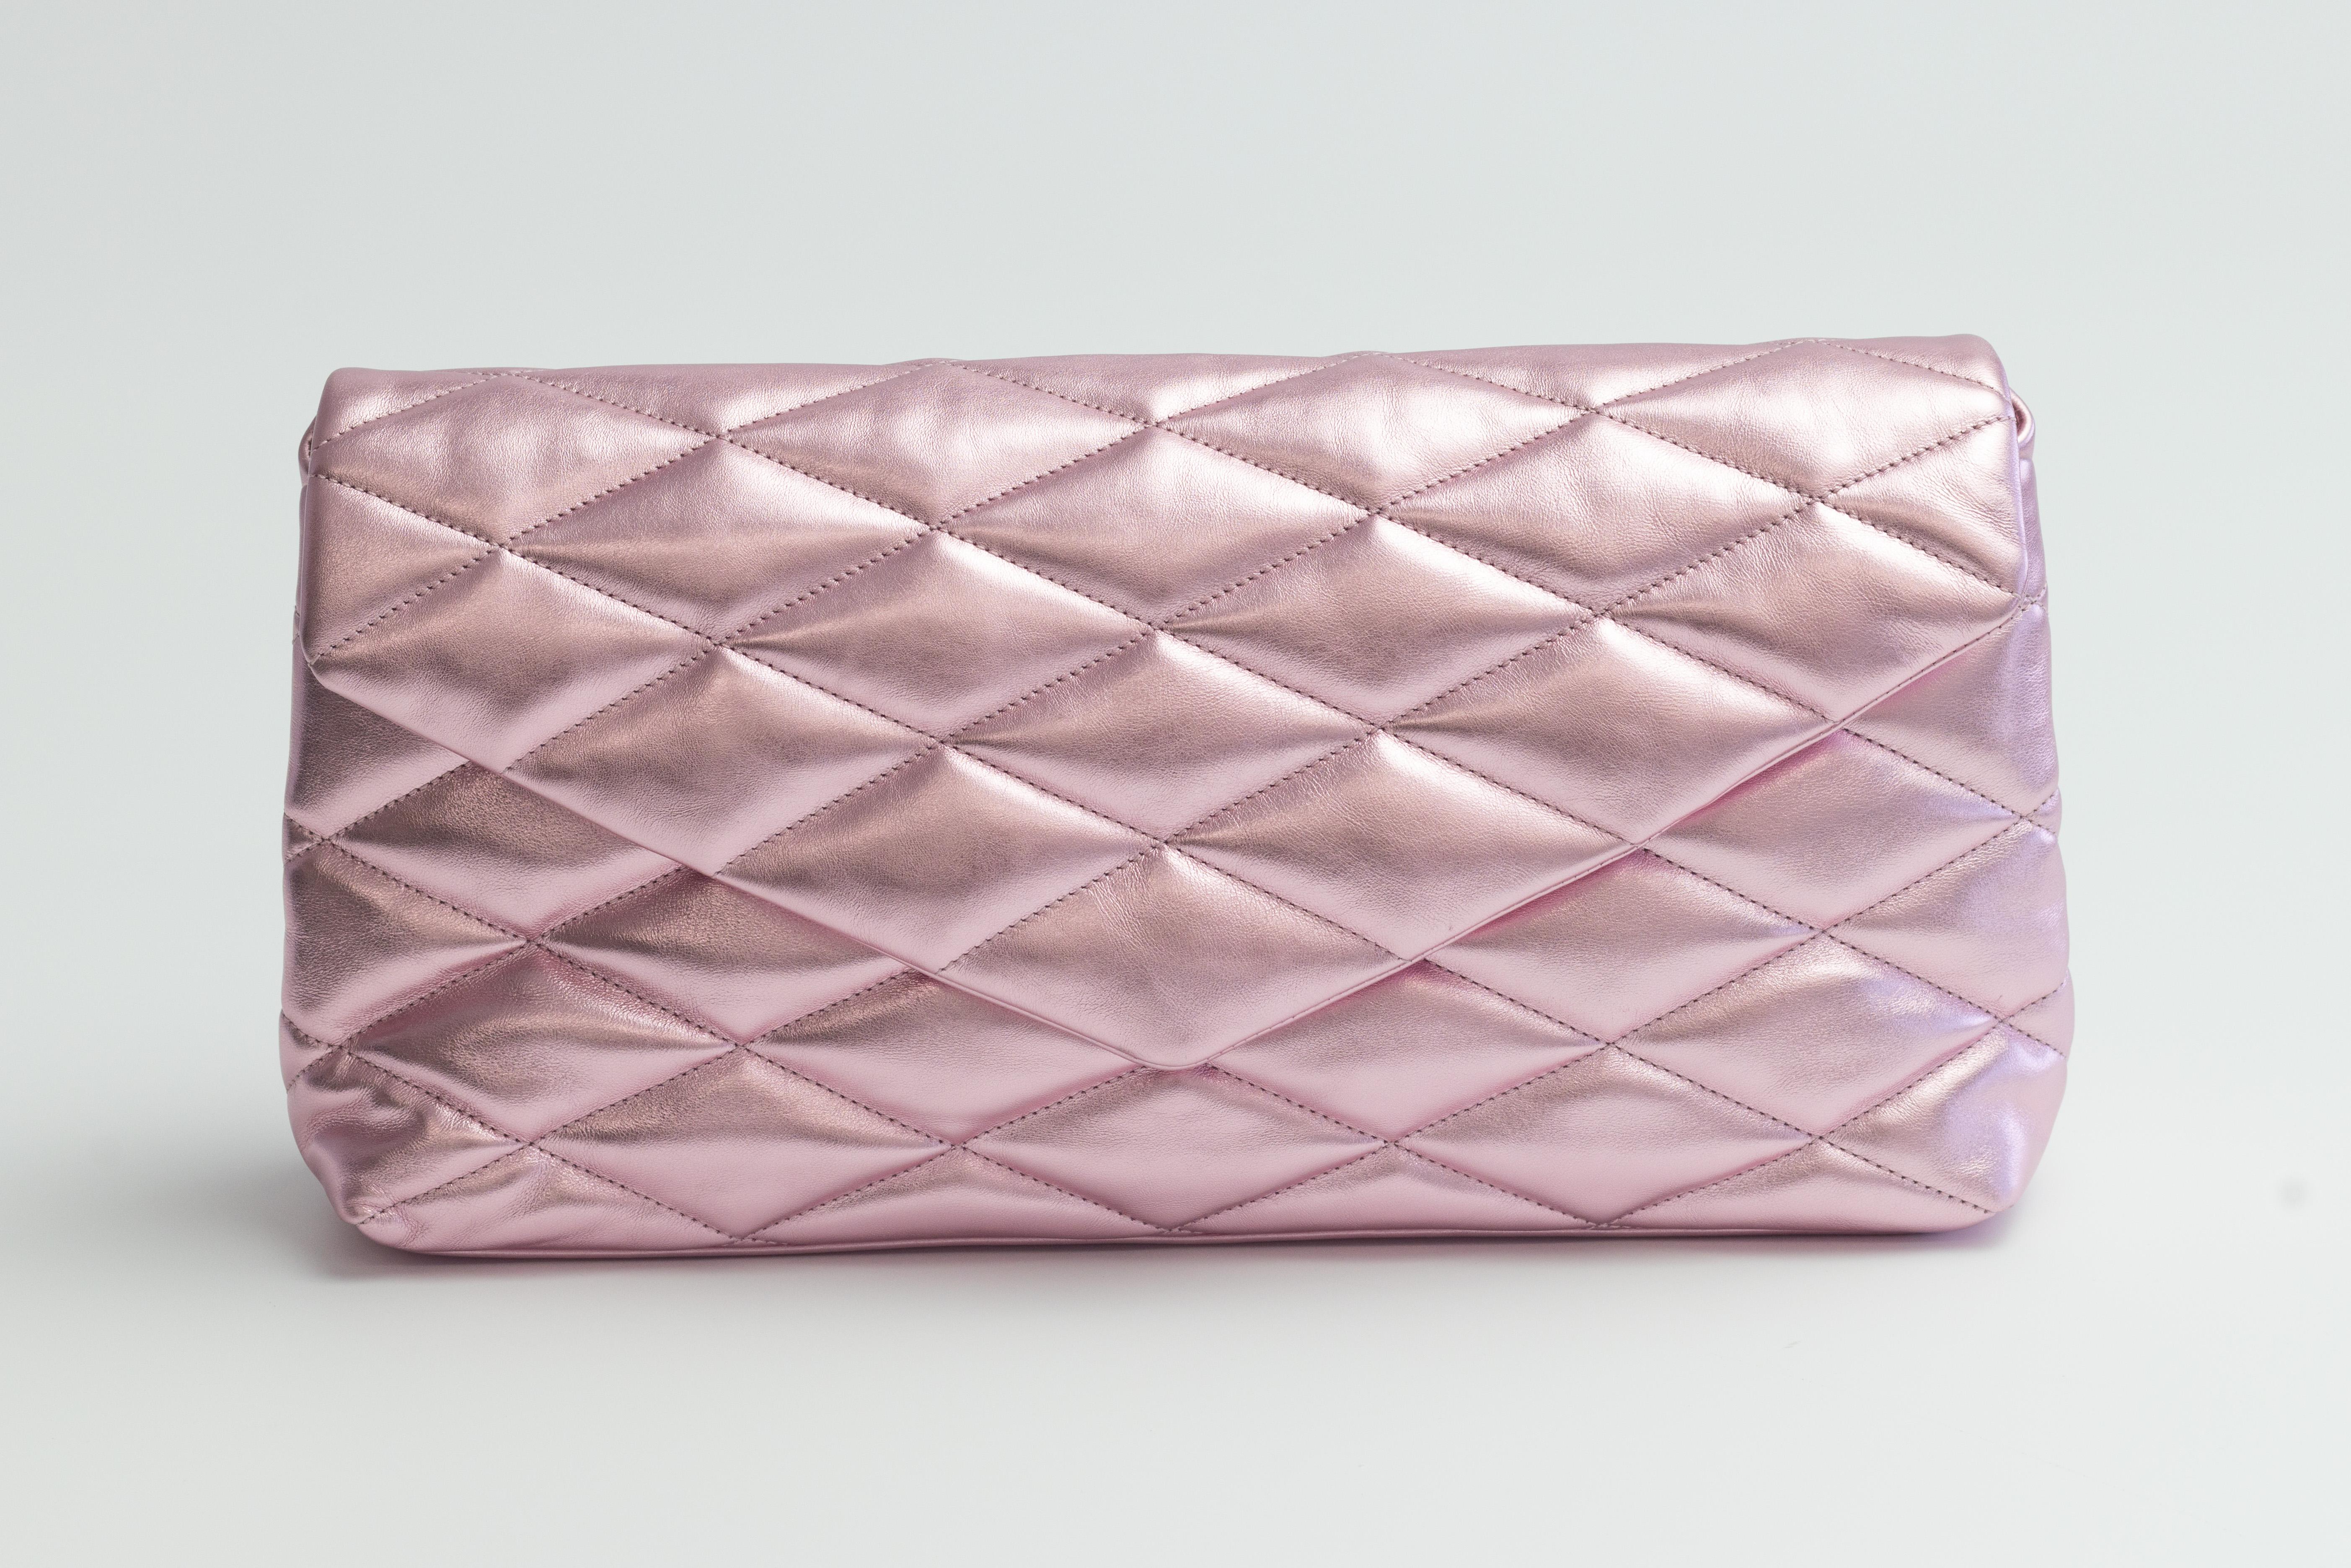 Saint Laurent Chardonnay Large Quilted Leather Clutch Bag In Excellent Condition For Sale In Montreal, Quebec